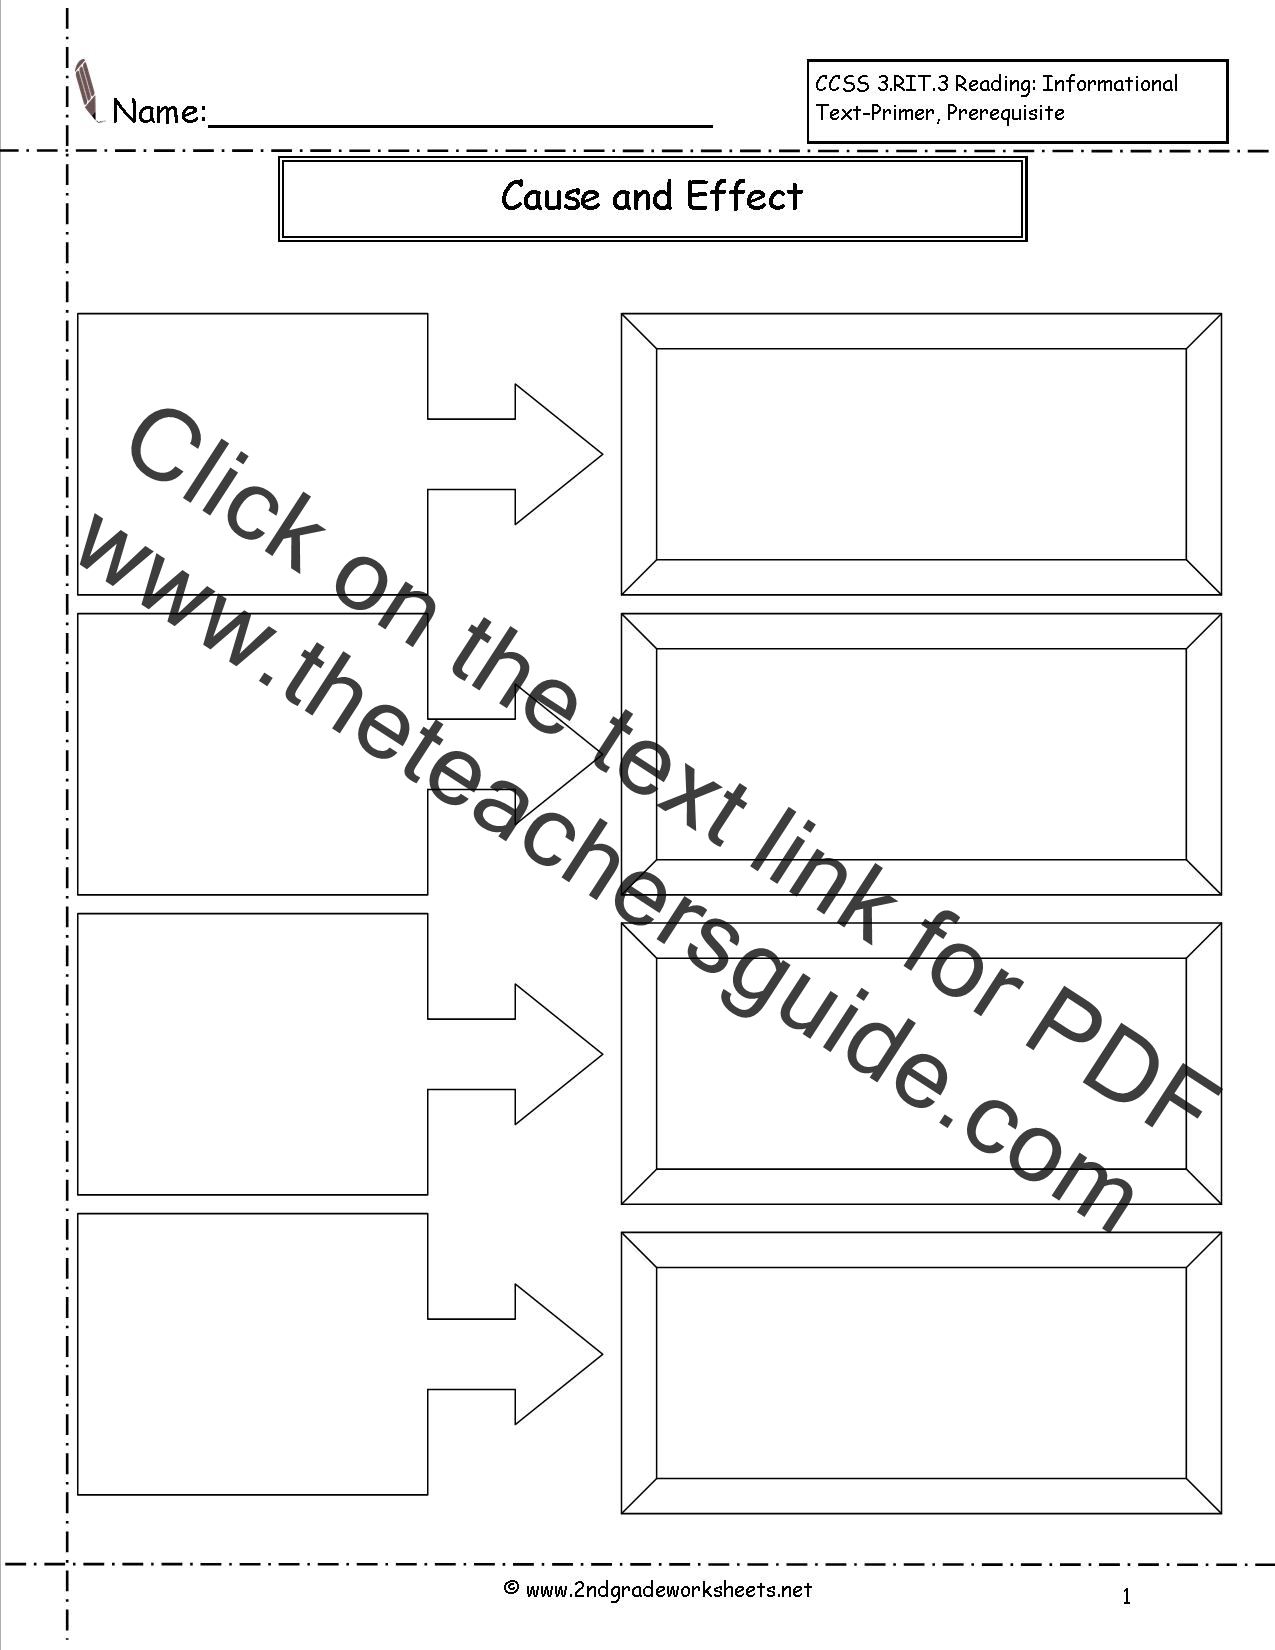 The Teacher's Guide-Free Worksheets, SMARTboard templates, and lesson plans for teachers.